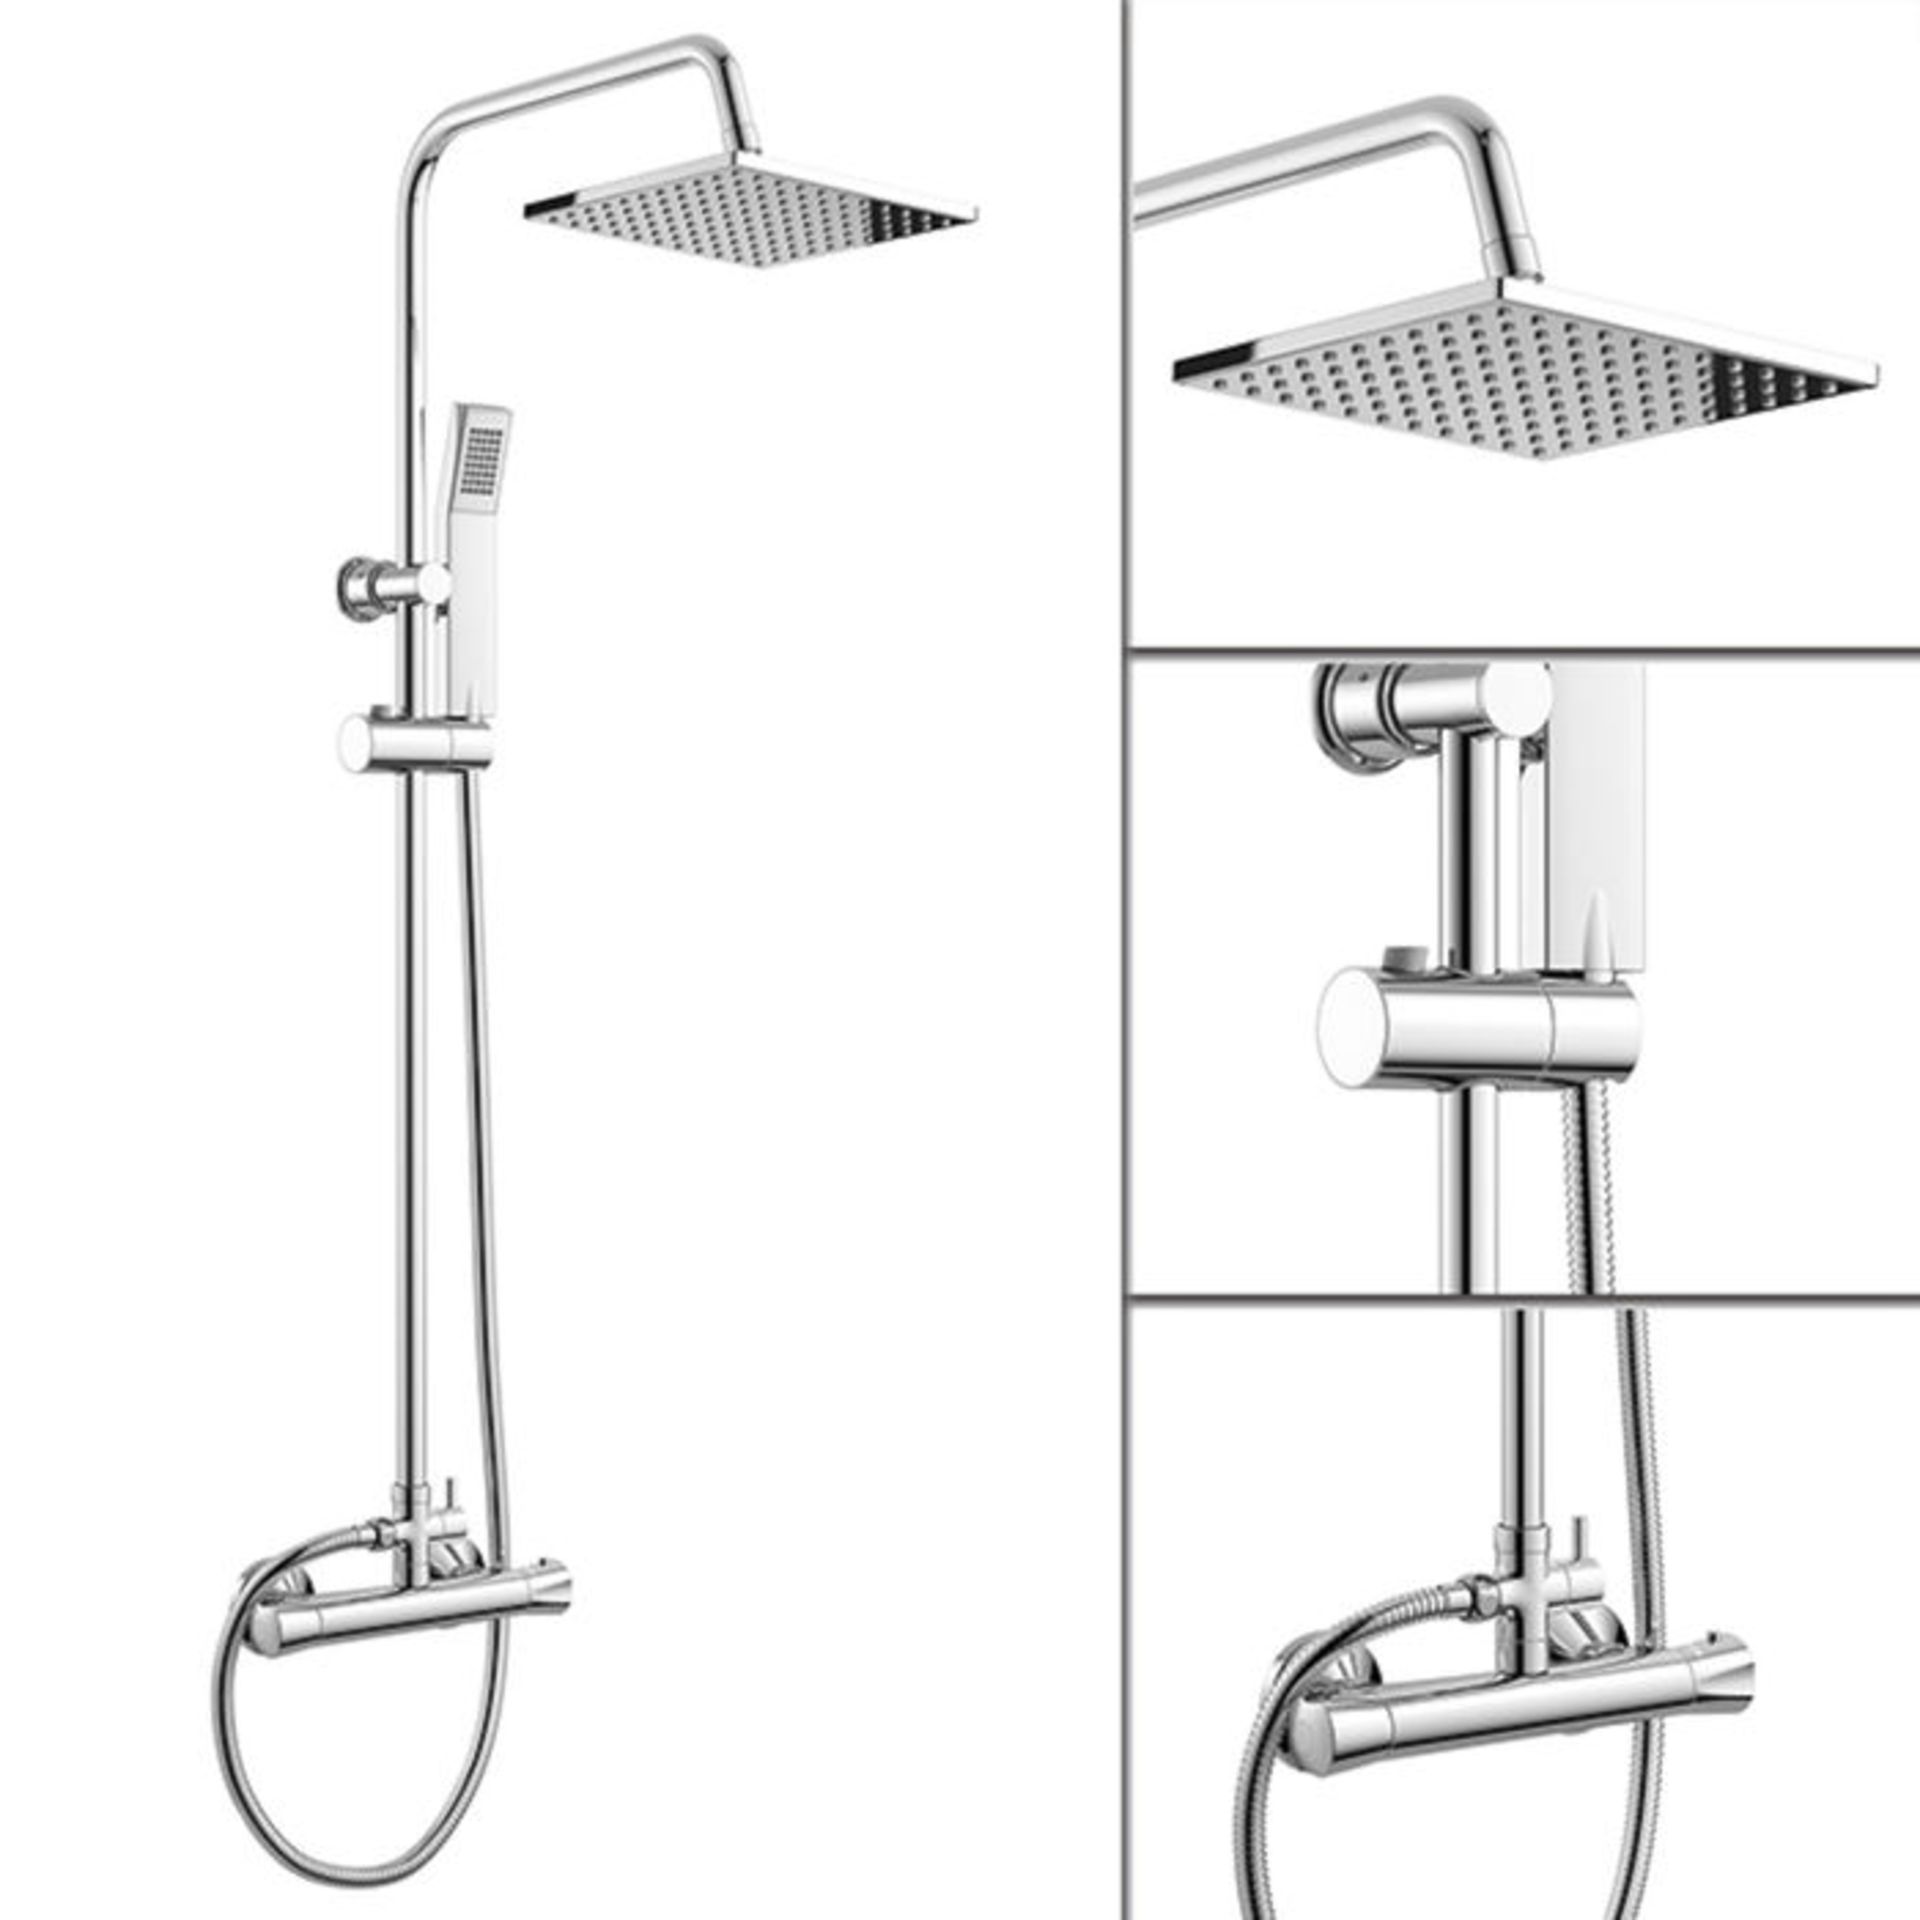 (DW238) Square Exposed Thermostatic Shower Kit & Head. Curved features and contemporary rounded... - Image 2 of 2